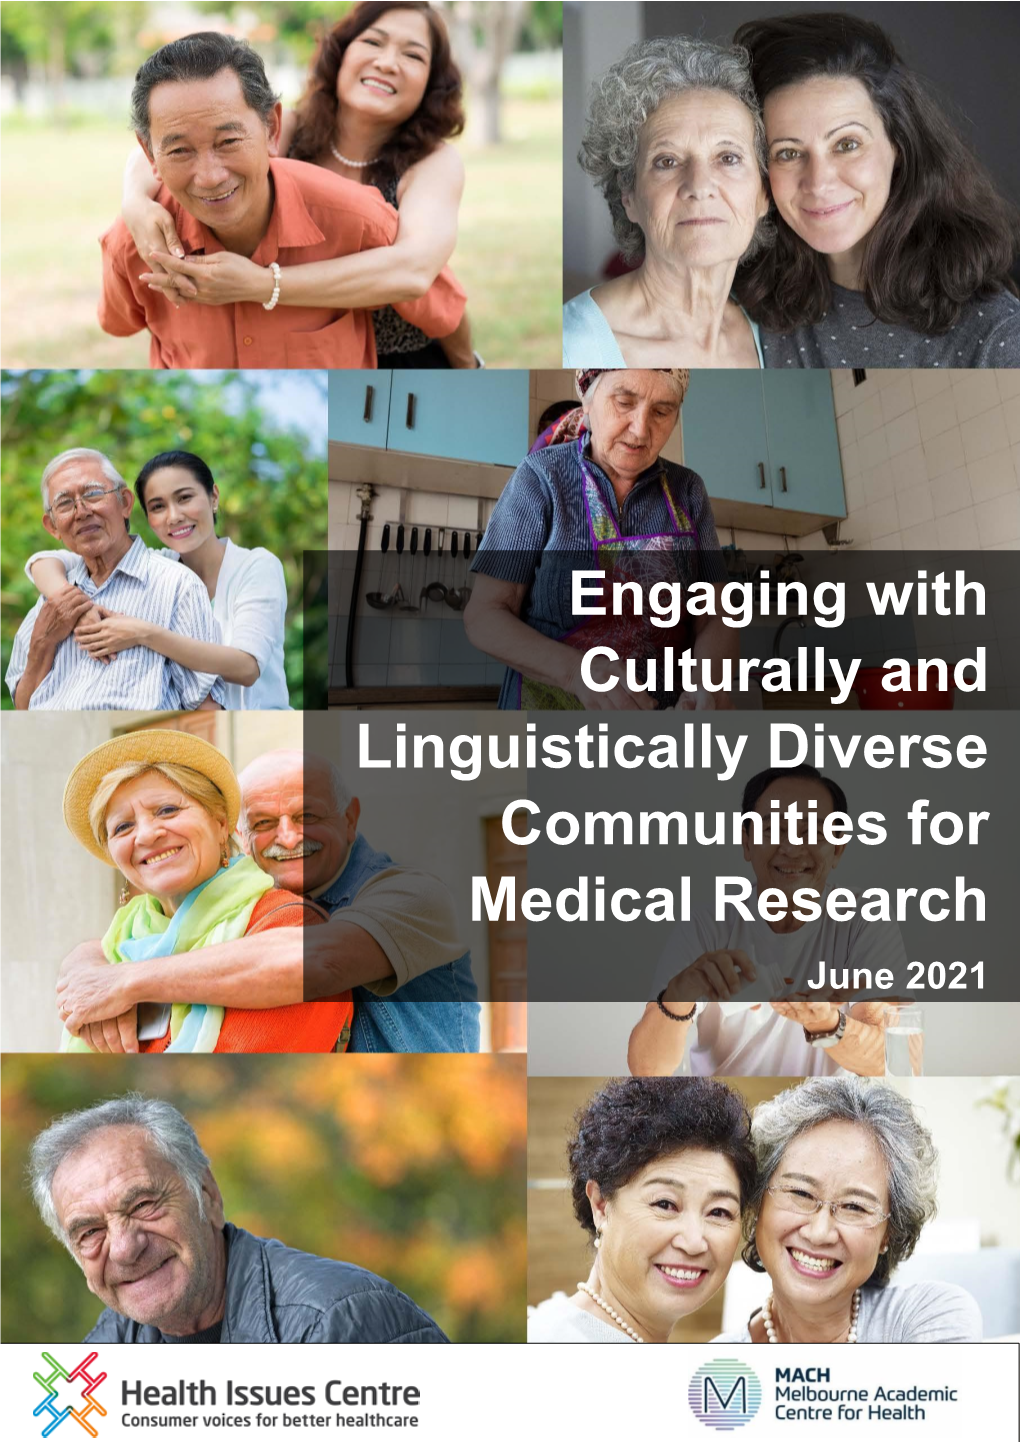 Engaging with Culturally and Linguistically Diverse Communities for Medical Research June 2021